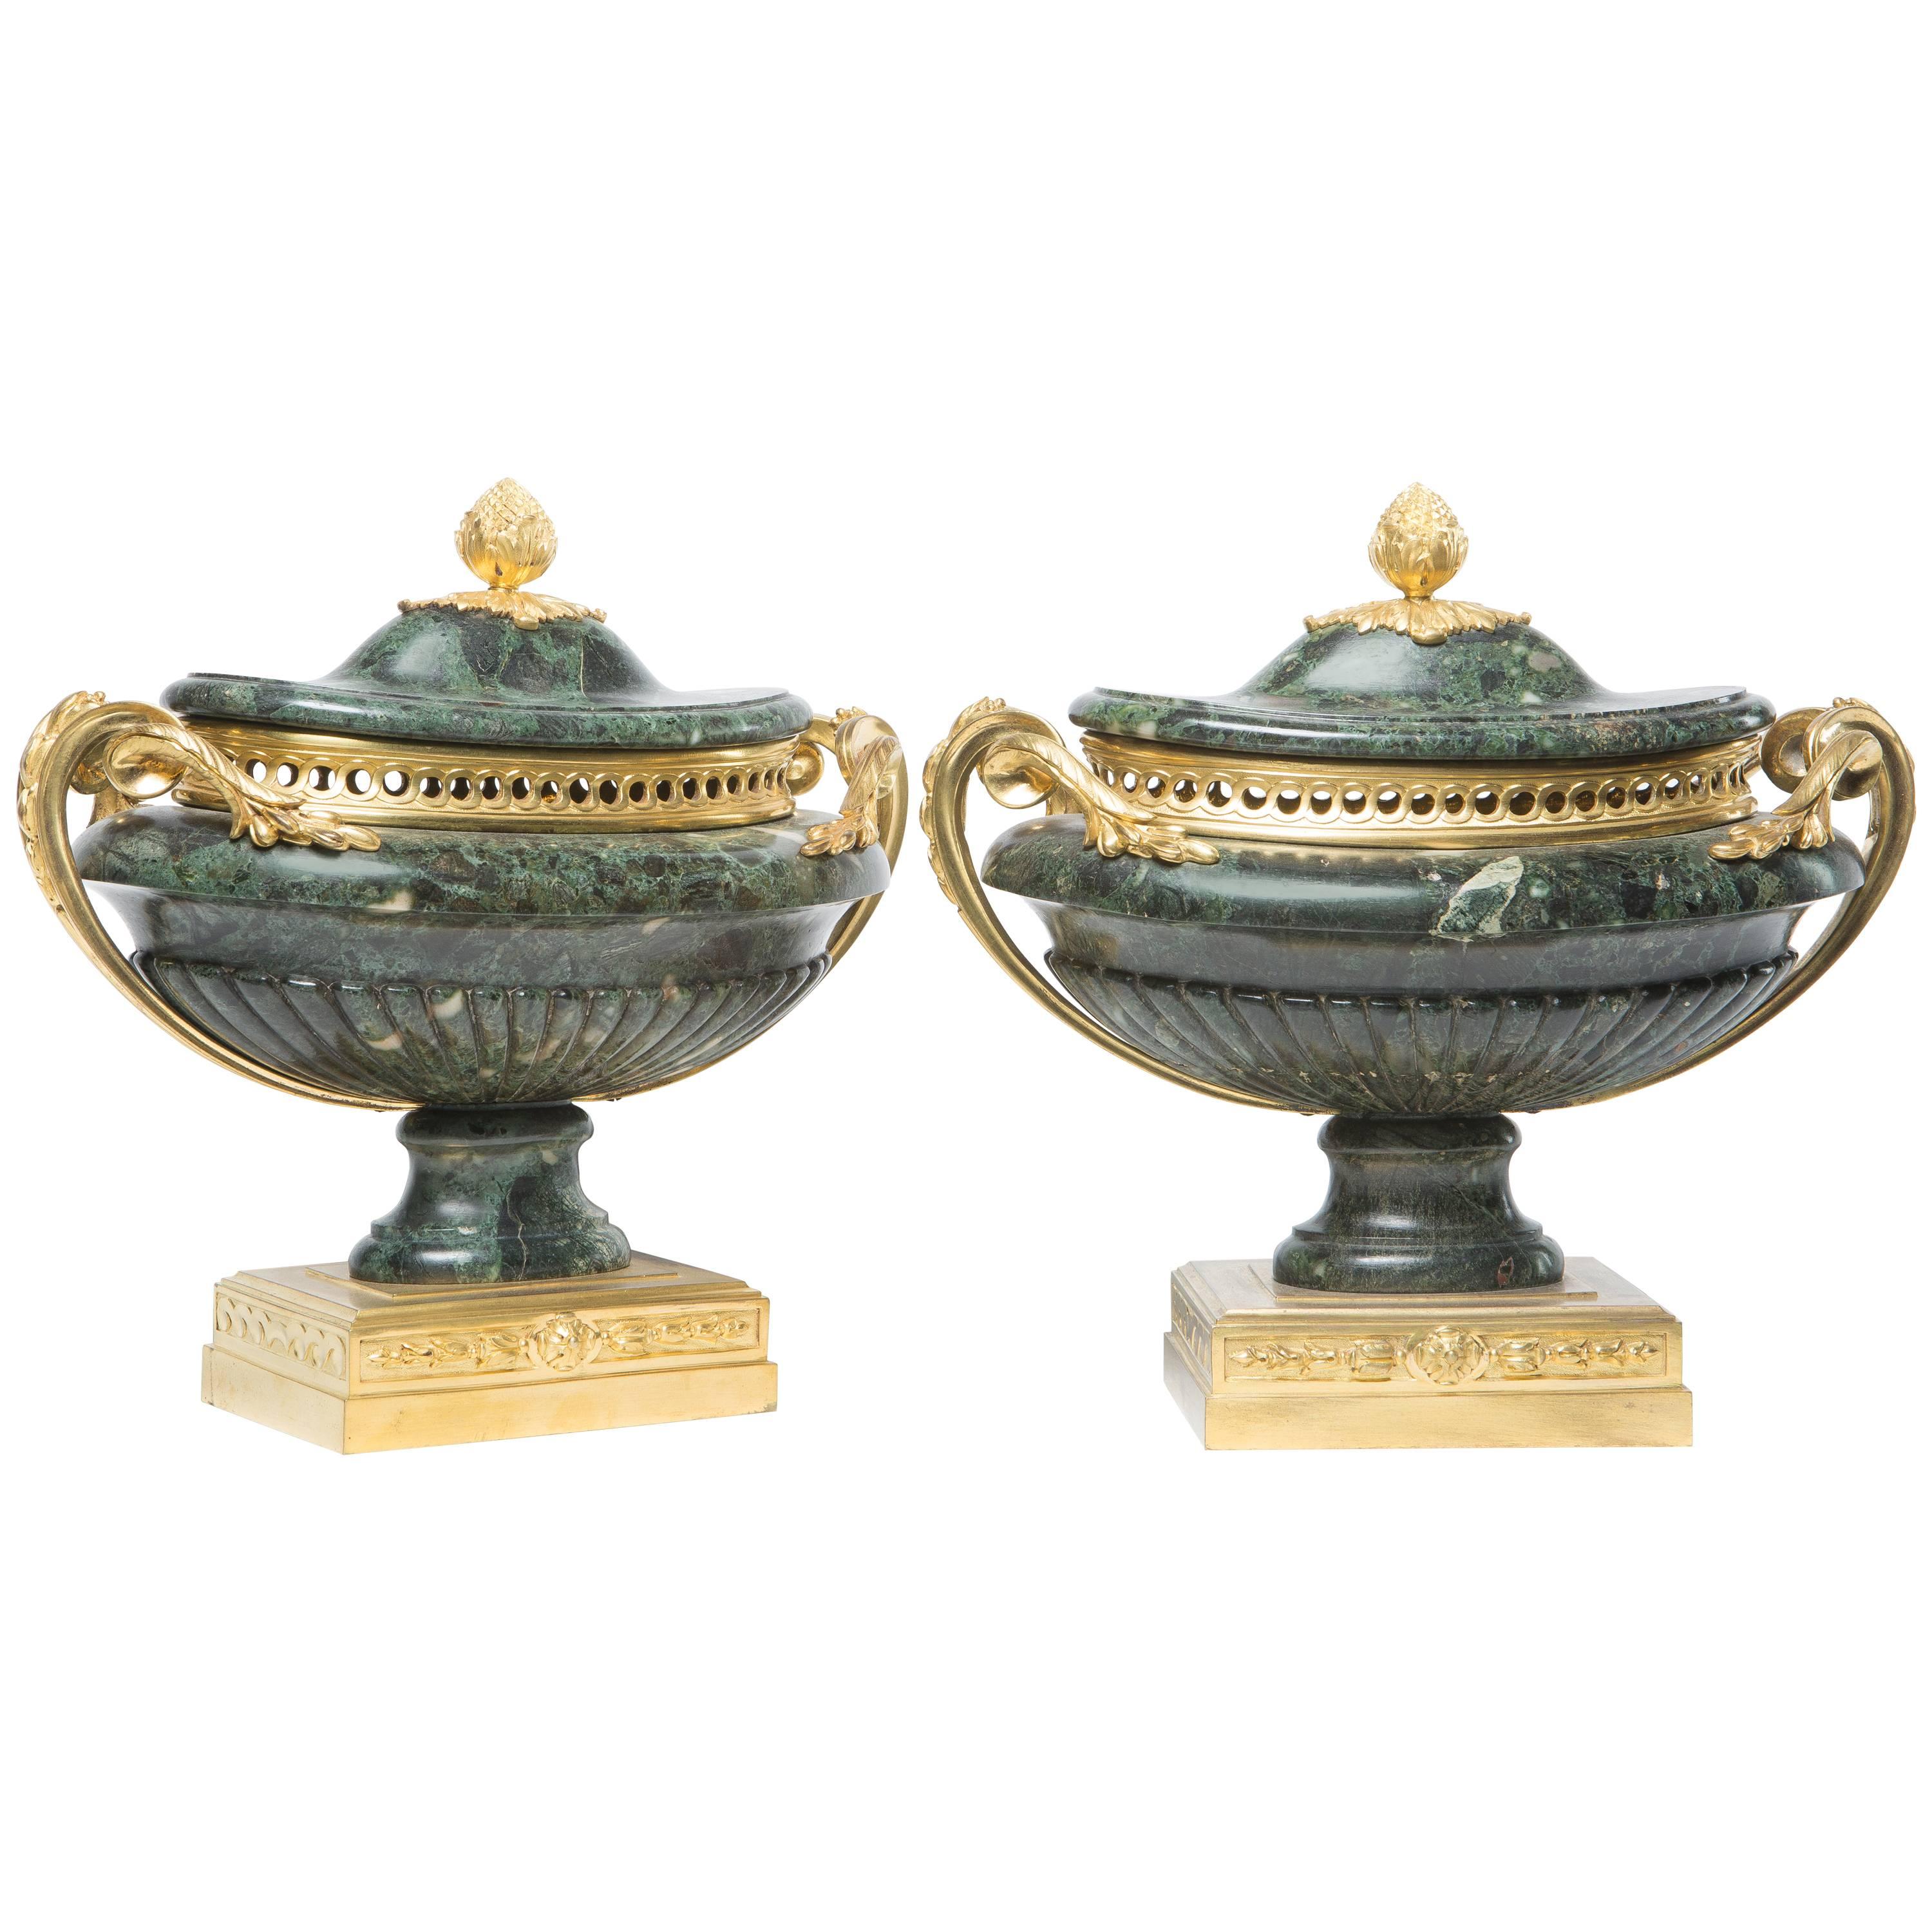 Fine Pair of French Louis XVI Style Gilt Bronze-Mounted Green Marble Lidded Urn For Sale